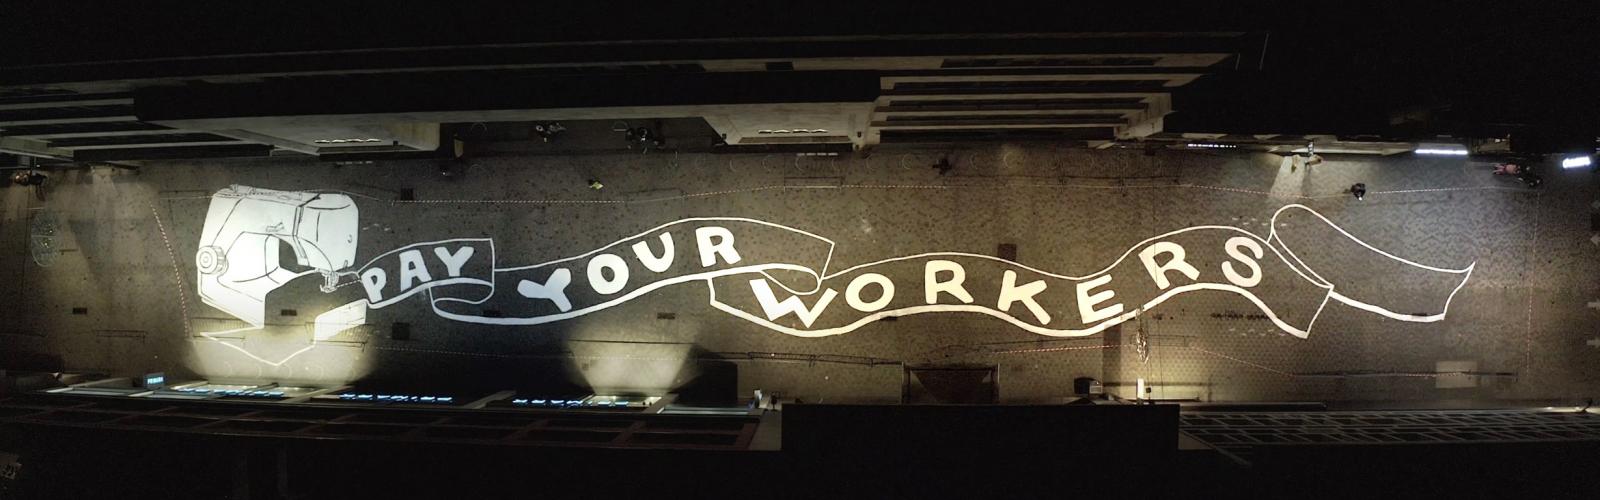 fresco 'Pay your workers'